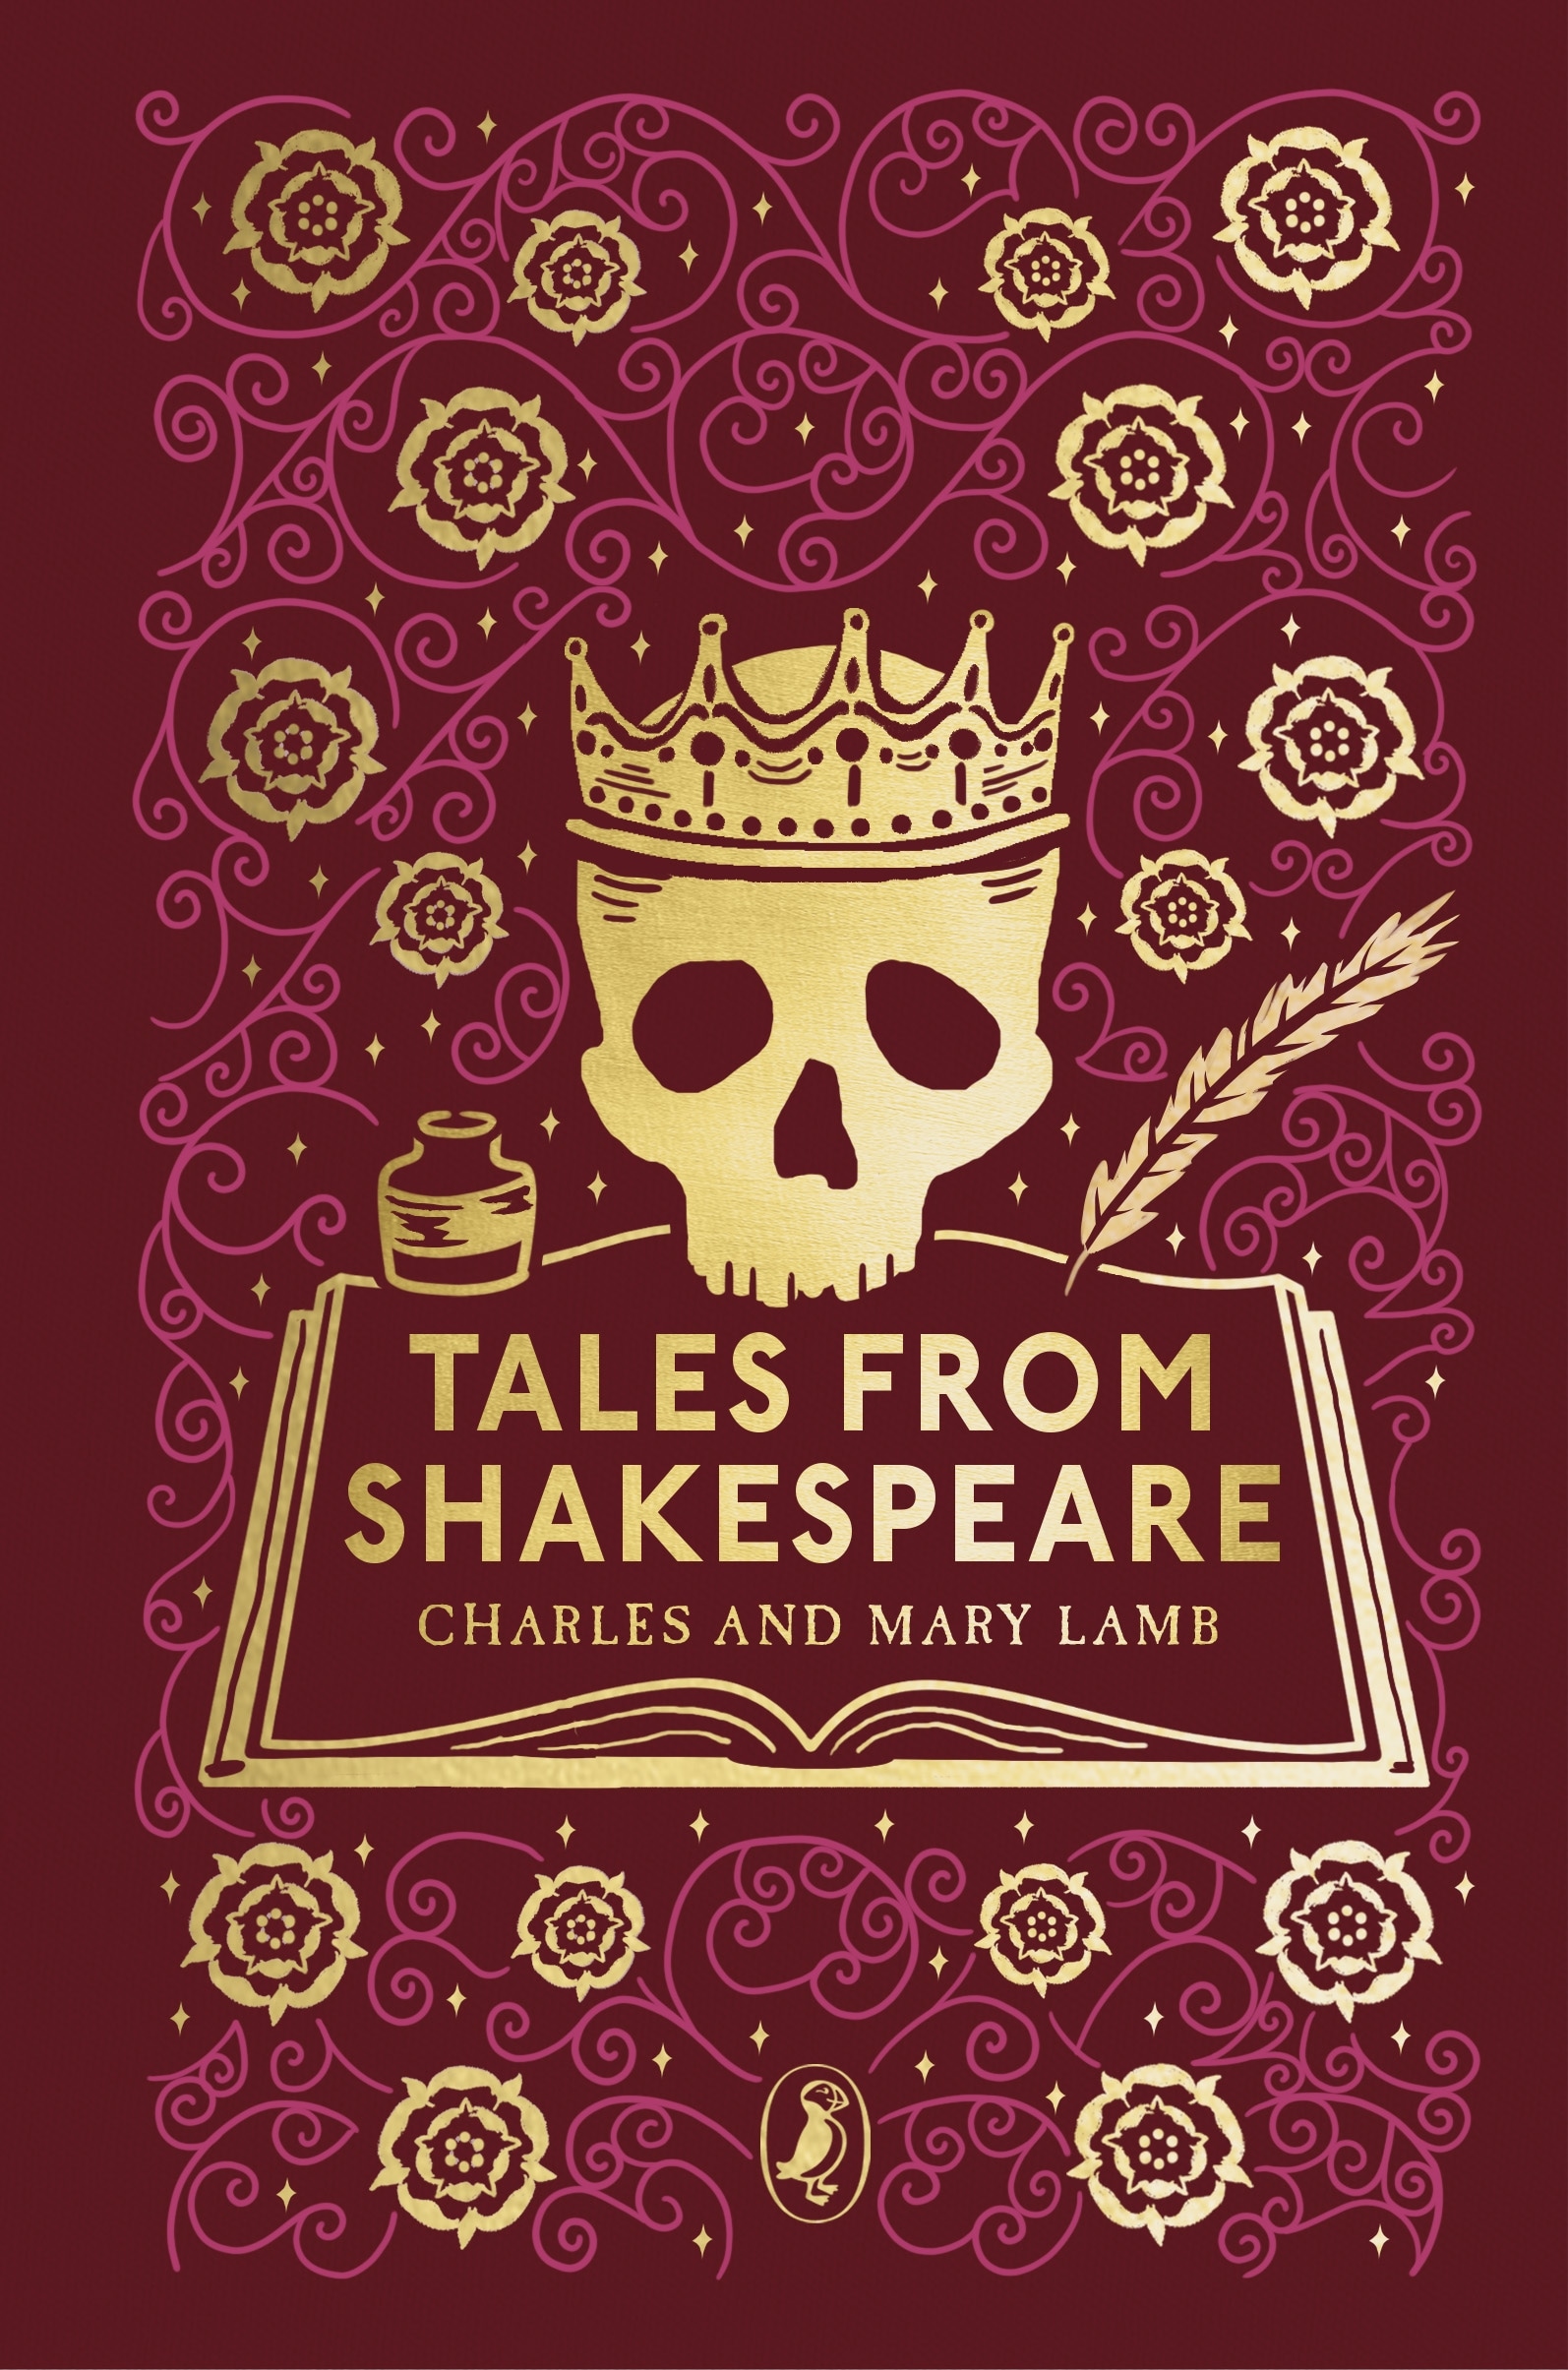 Book “Tales from Shakespeare” by Charles Lamb, Mary Lamb — February 17, 2022